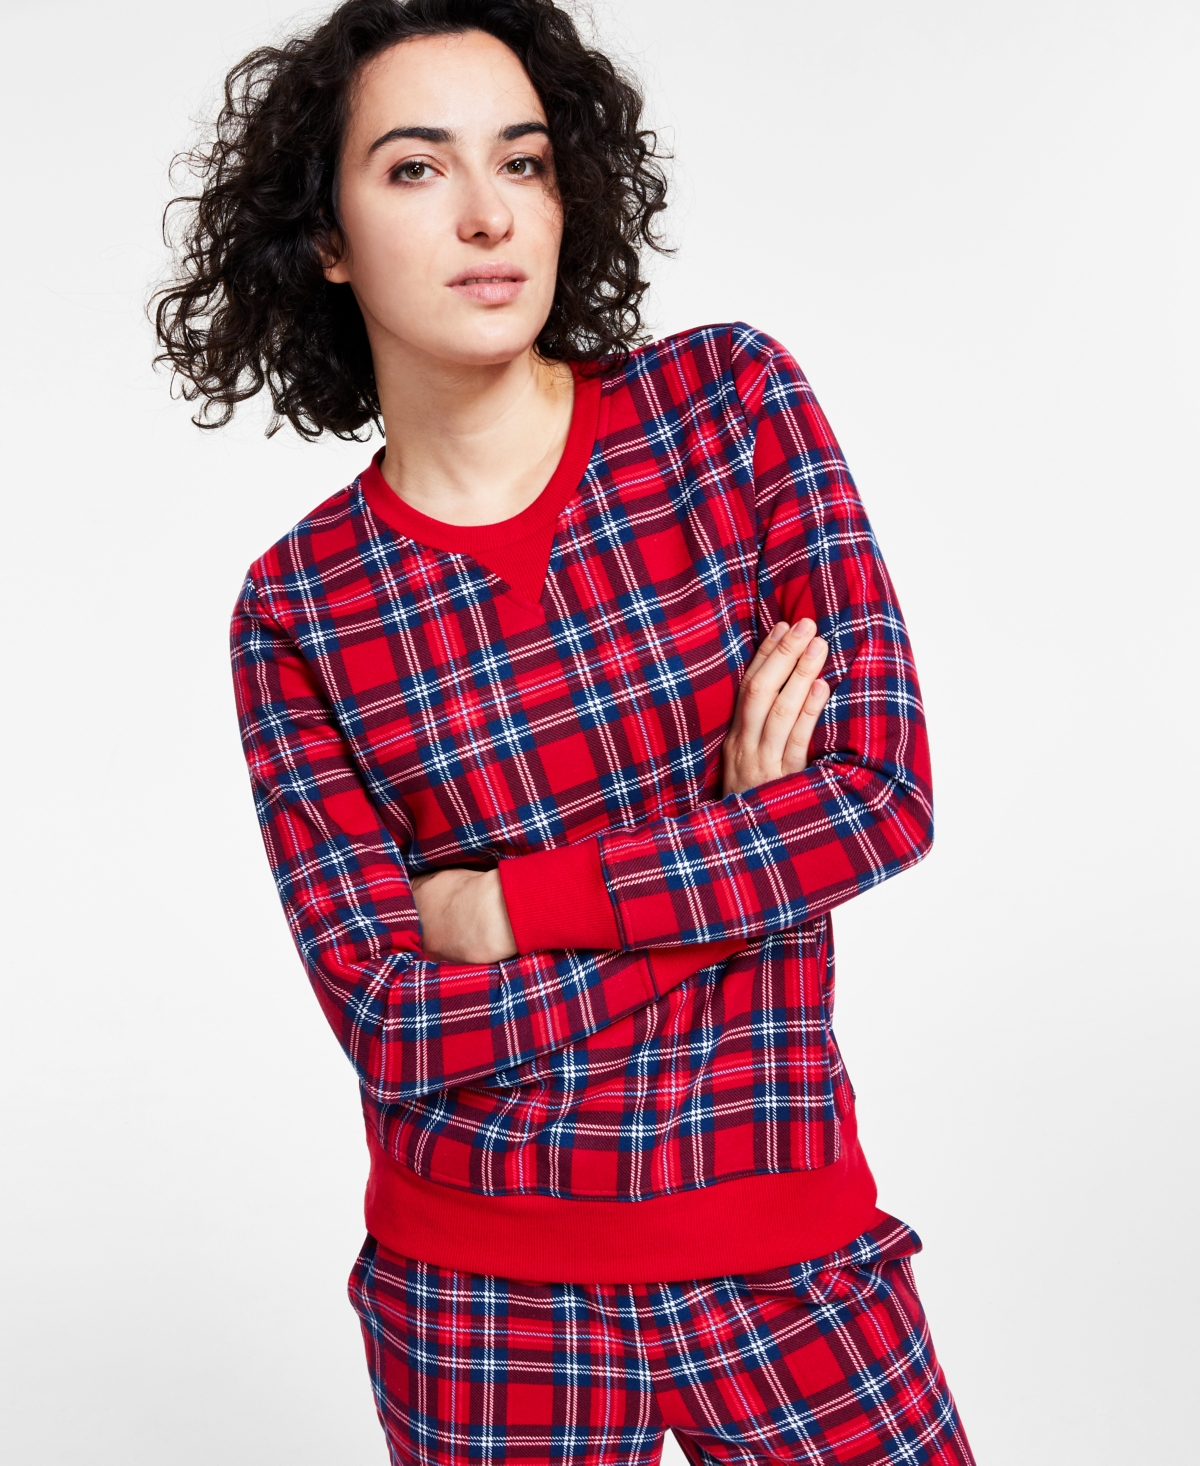 Charter Club Women's Printed Plaid Matching Crewneck Top, Created for Macy's